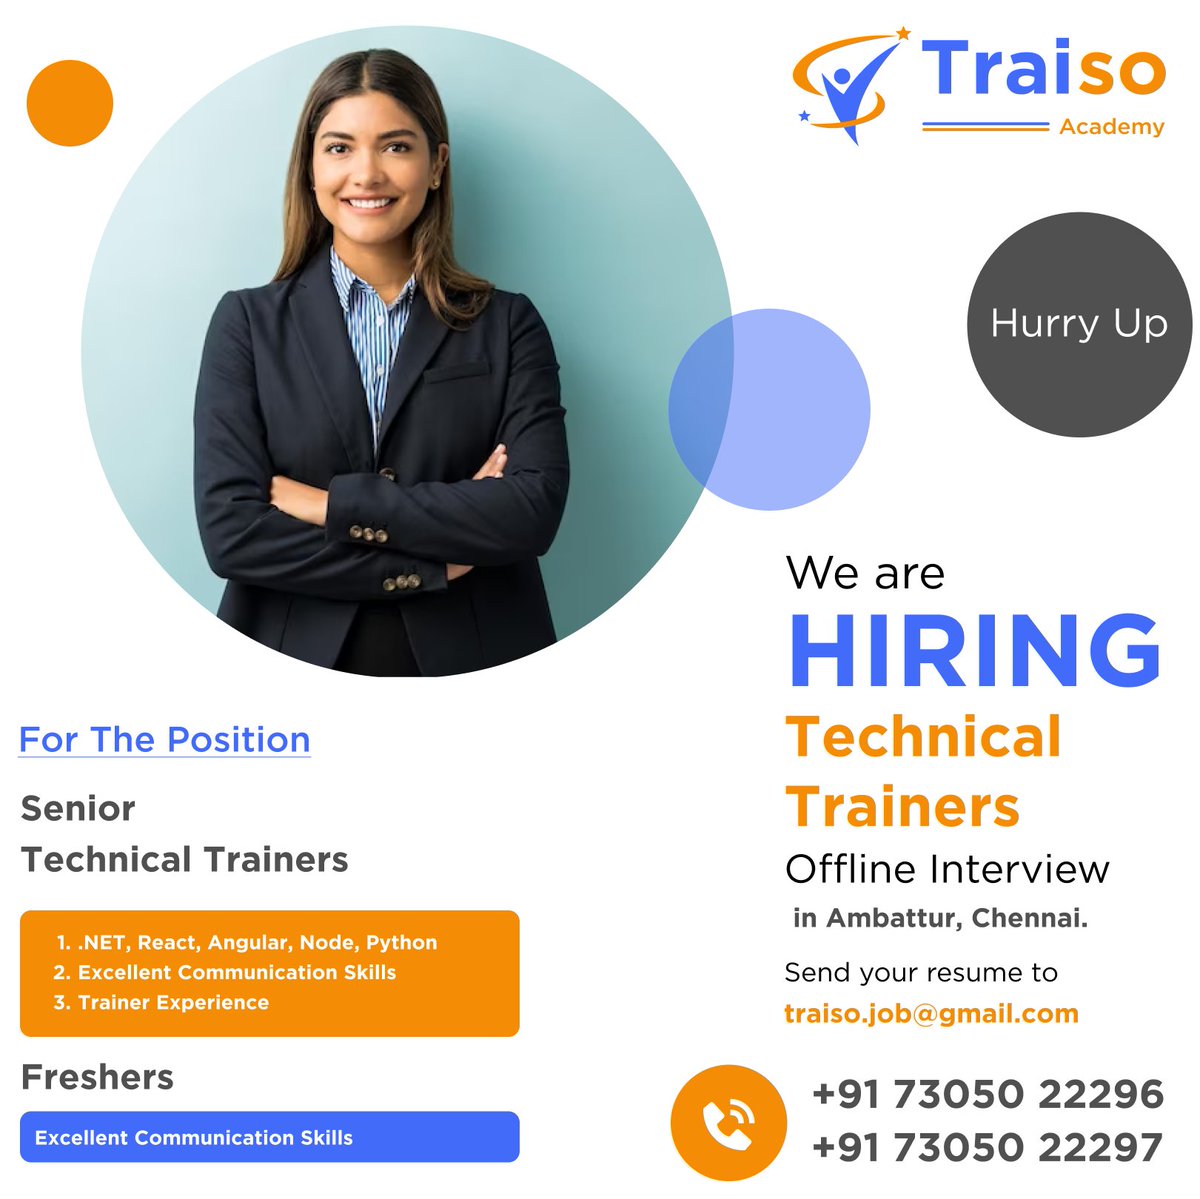 Hello Everyone, we are hiring for Technical Trainers for Traiso Academy. Don't miss out the golden opportunity.

Mobile: +91 73050 22296, +91 73050 22297
Email: traiso.job@gmail.com
#traiso #traisoacademy #technologytraining #placements #hiring #hiringimmediately #hiringfreshers